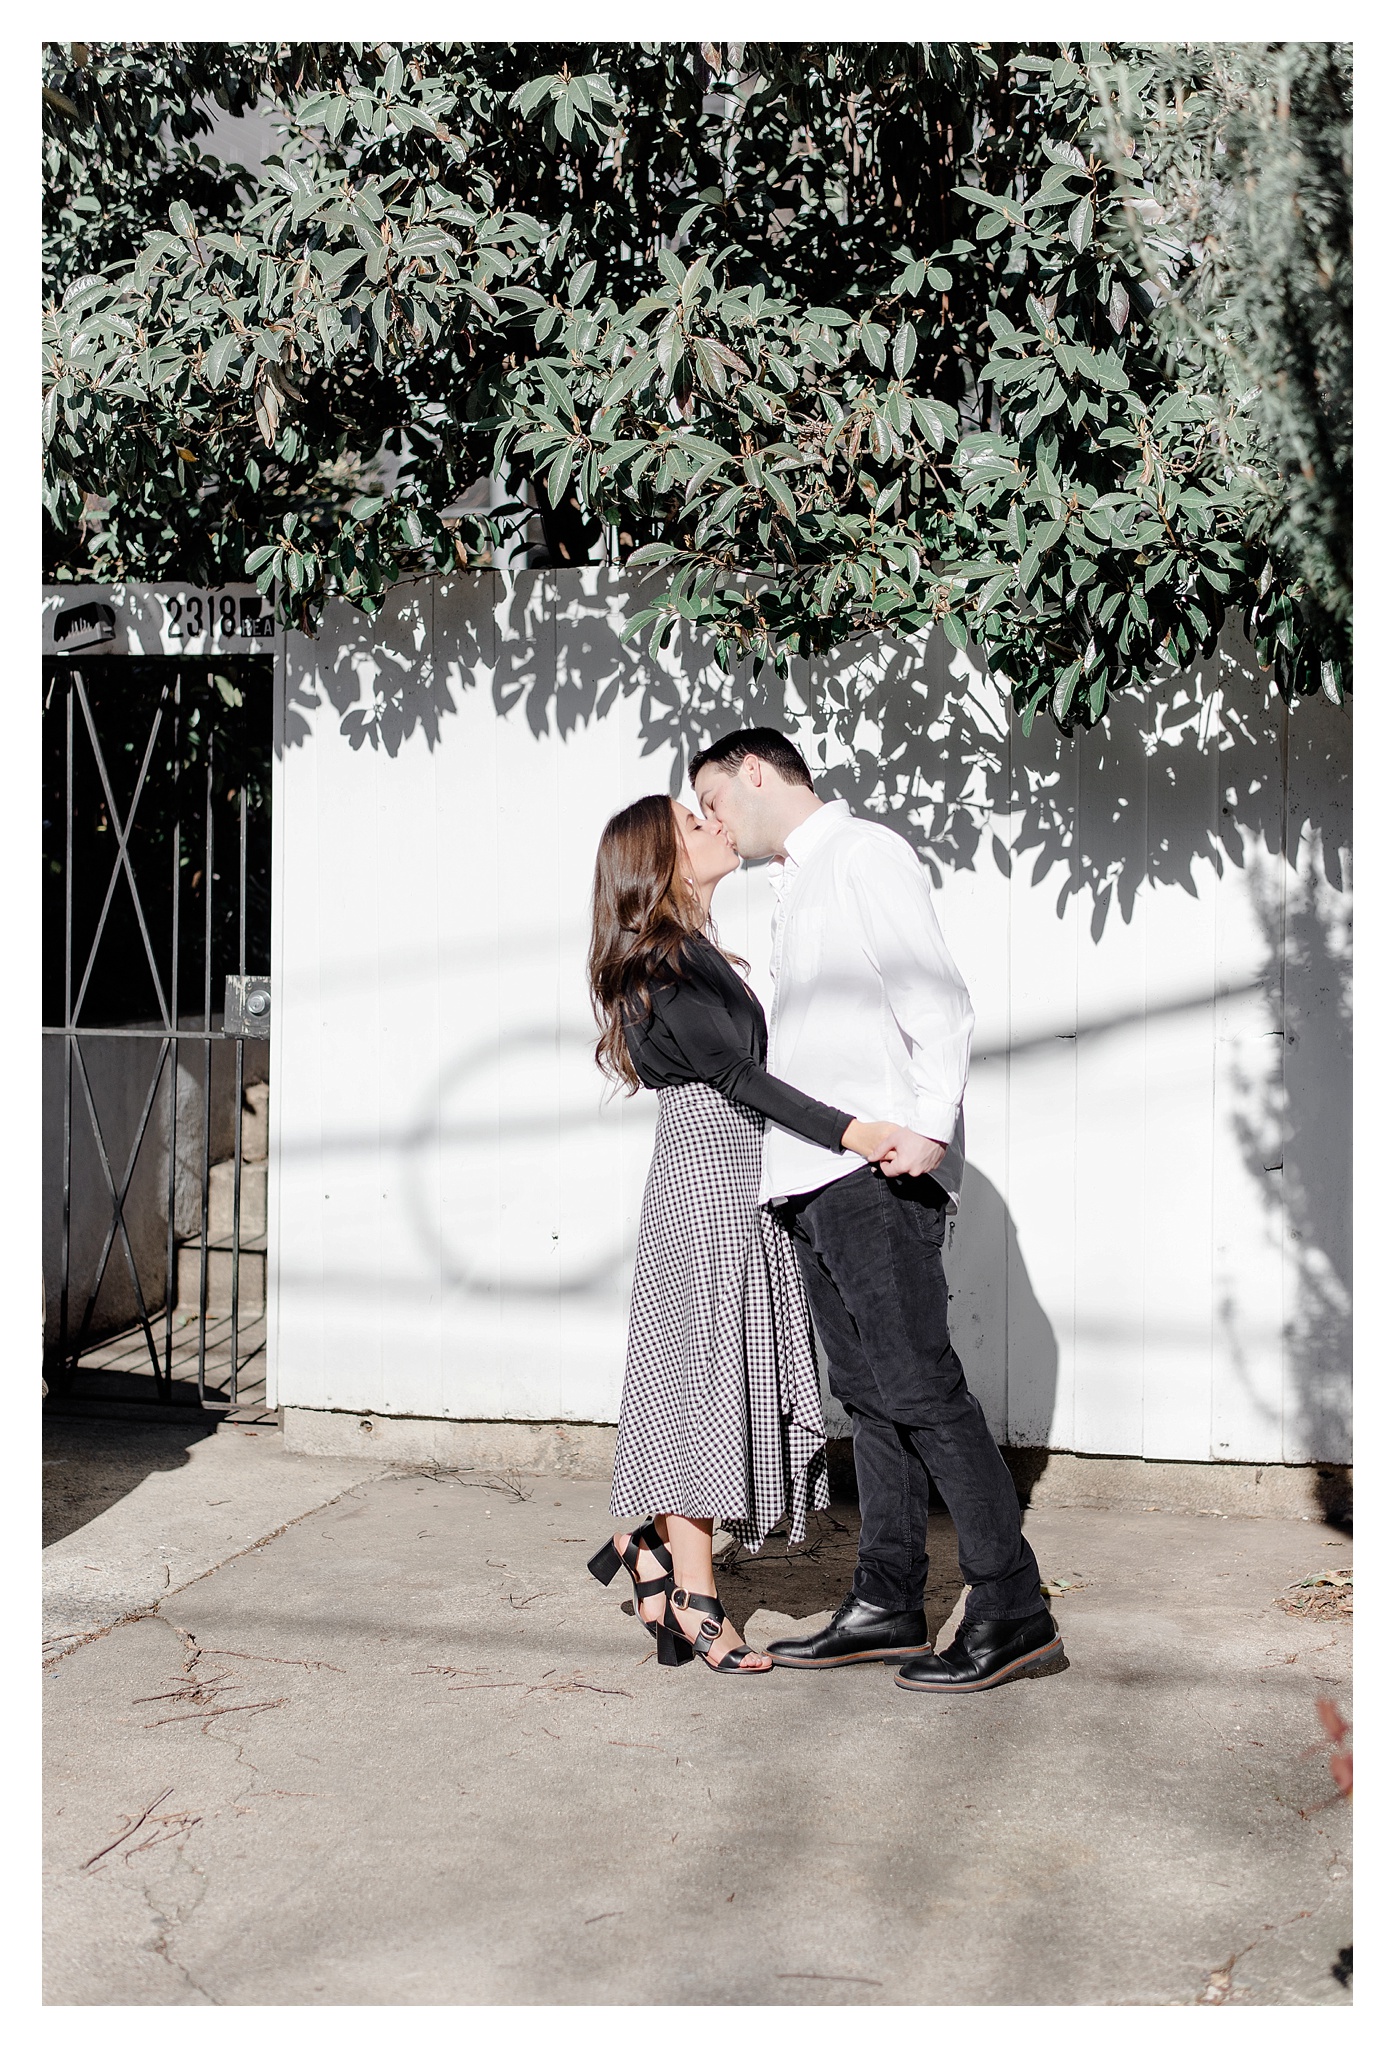 Old Town Alexandria Engagement Session | Jesse + Briana - Hannah Smith ...